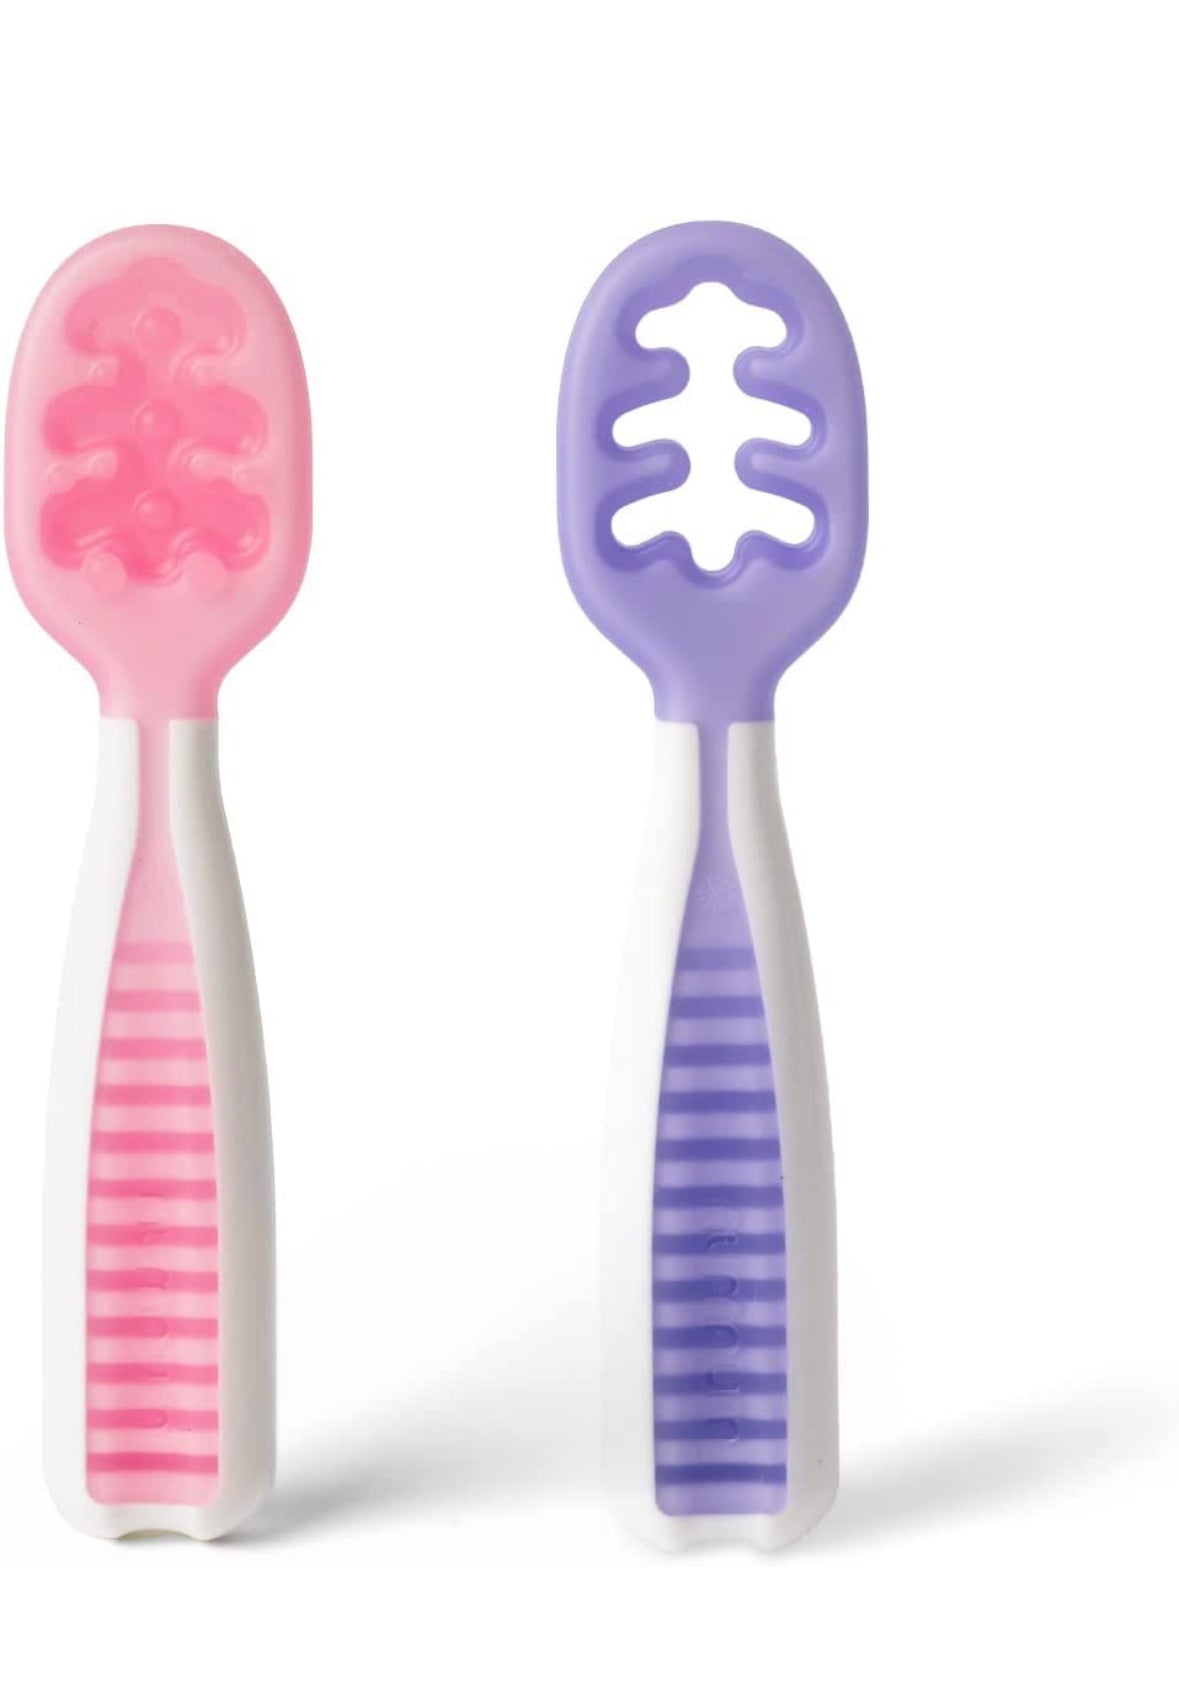 Baby Spoon Set (Stage 1 + Stage 2).